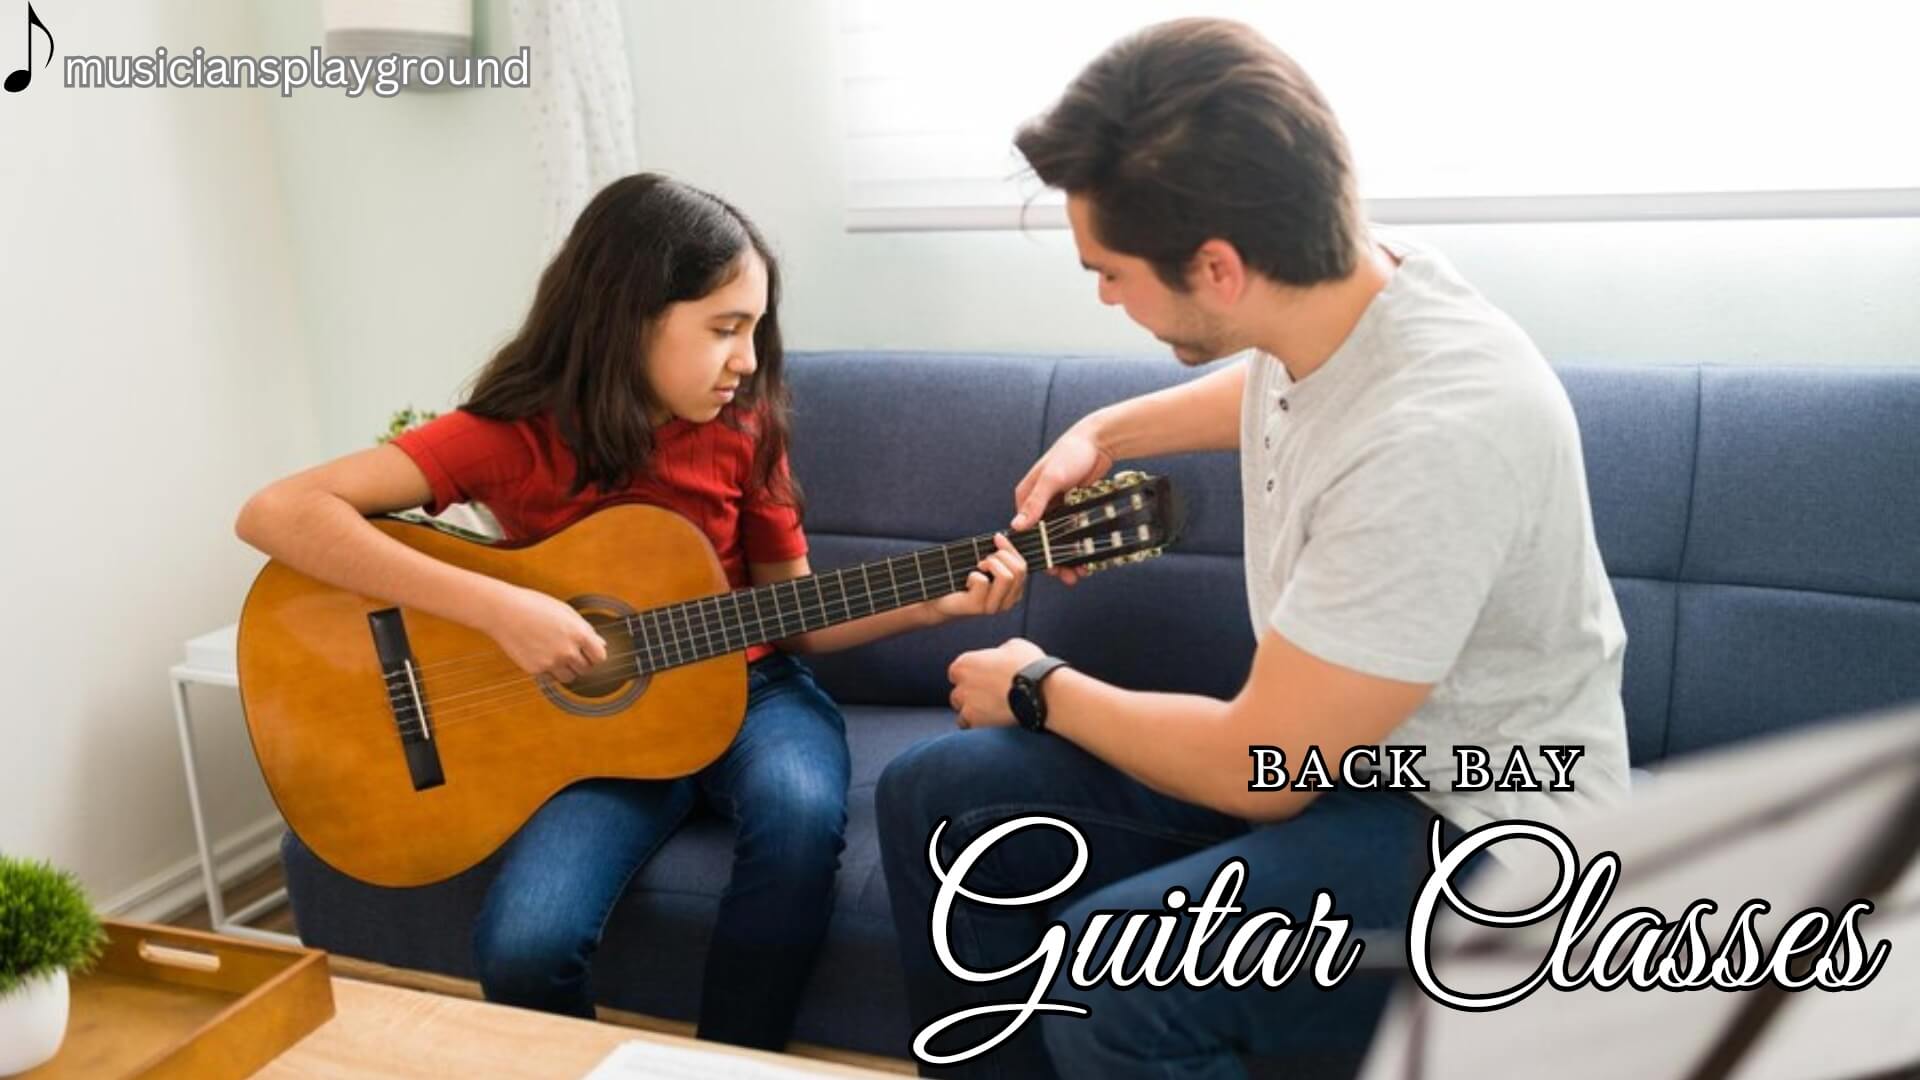 Welcome to Guitar Classes in Back Bay, Massachusetts: Learn to Play Guitar at Musicians Playground